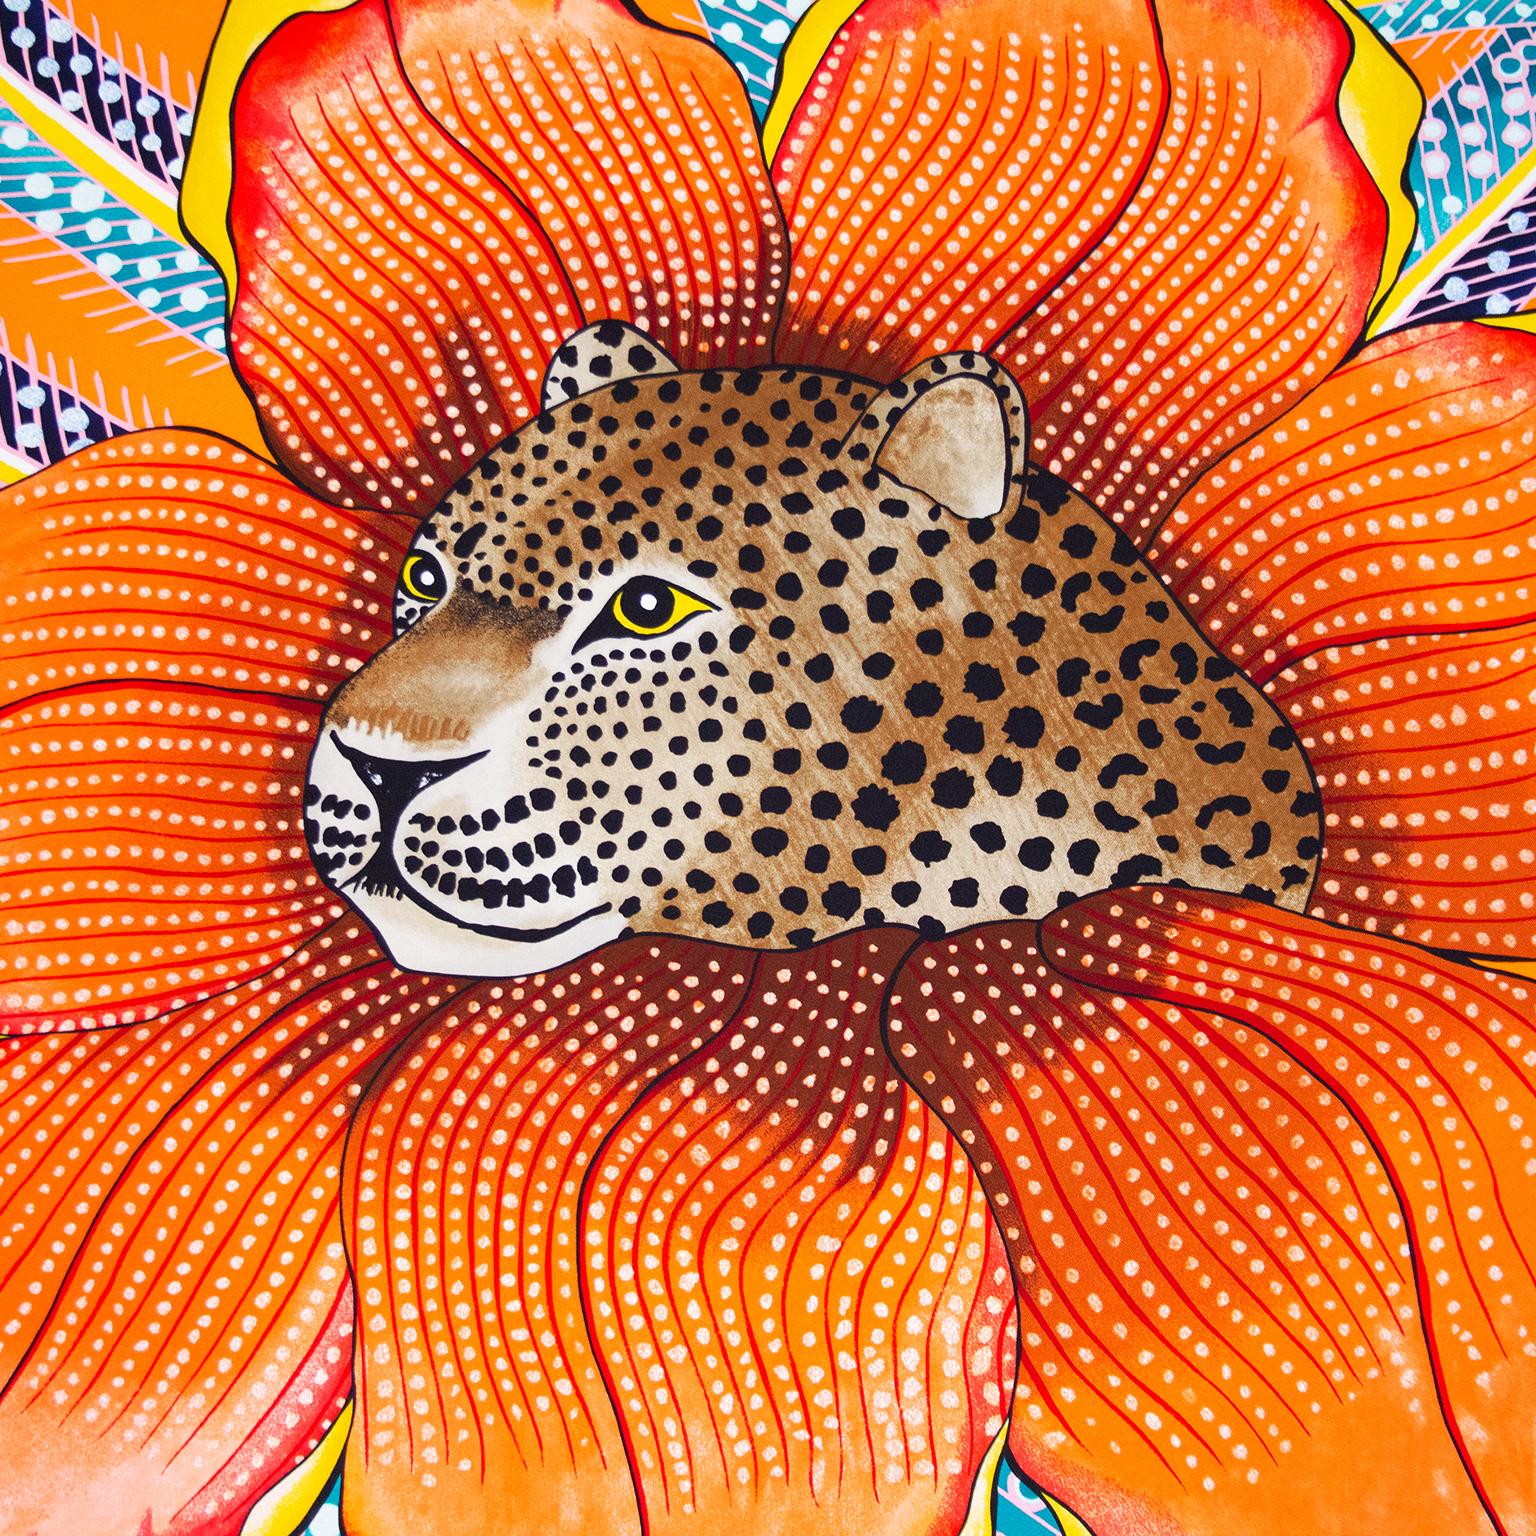 Hermes 'Baobab Cat' scarf. This lovely and colourful scarf features a leopard sitting in the the heart of a baobab ﬂower. For the Zulu kings, this majestic big cat incarnated their noble status, while the baobab represented power and grace. The